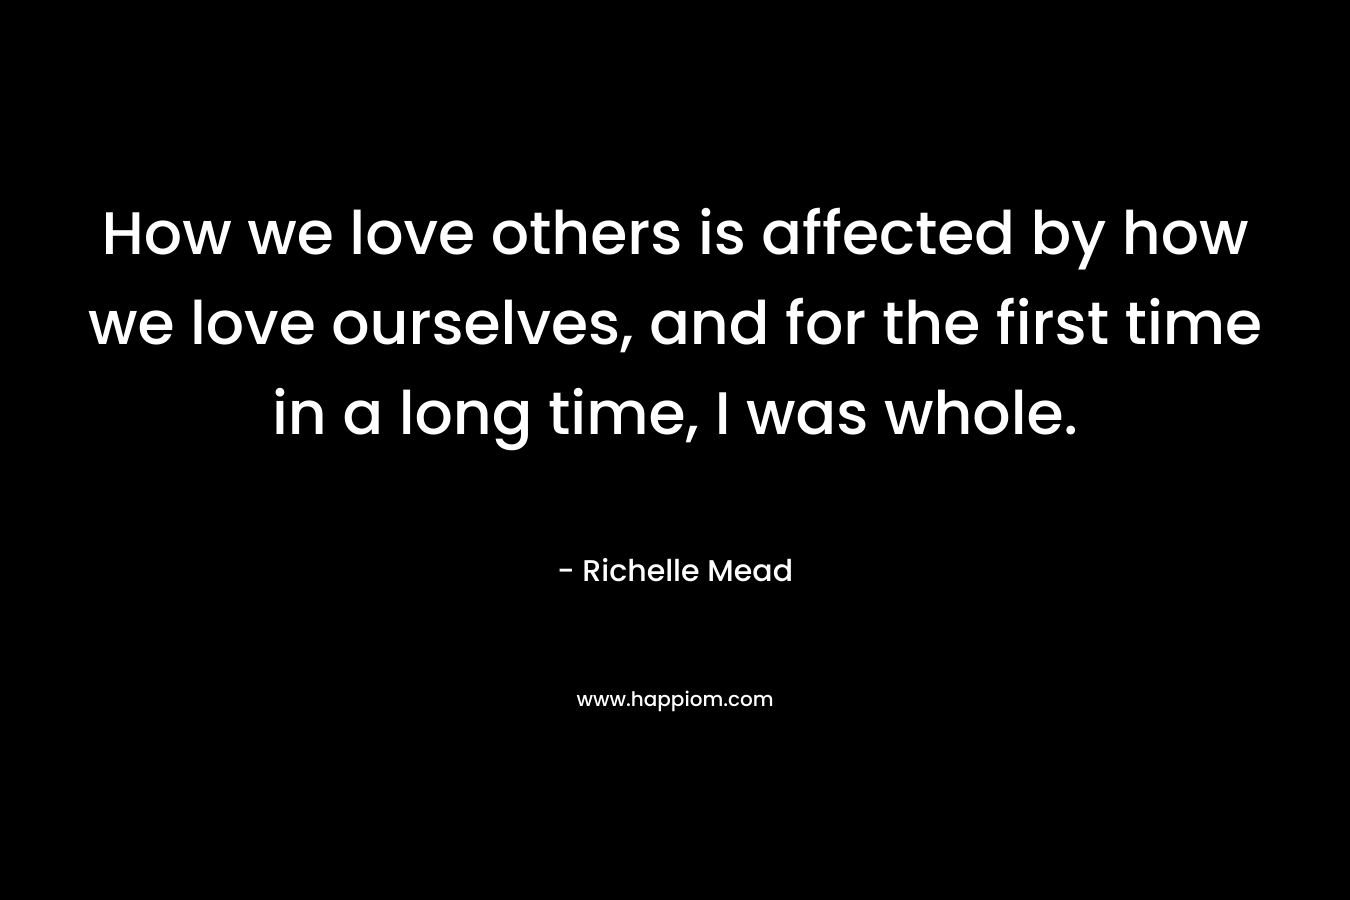 How we love others is affected by how we love ourselves, and for the first time in a long time, I was whole. – Richelle Mead